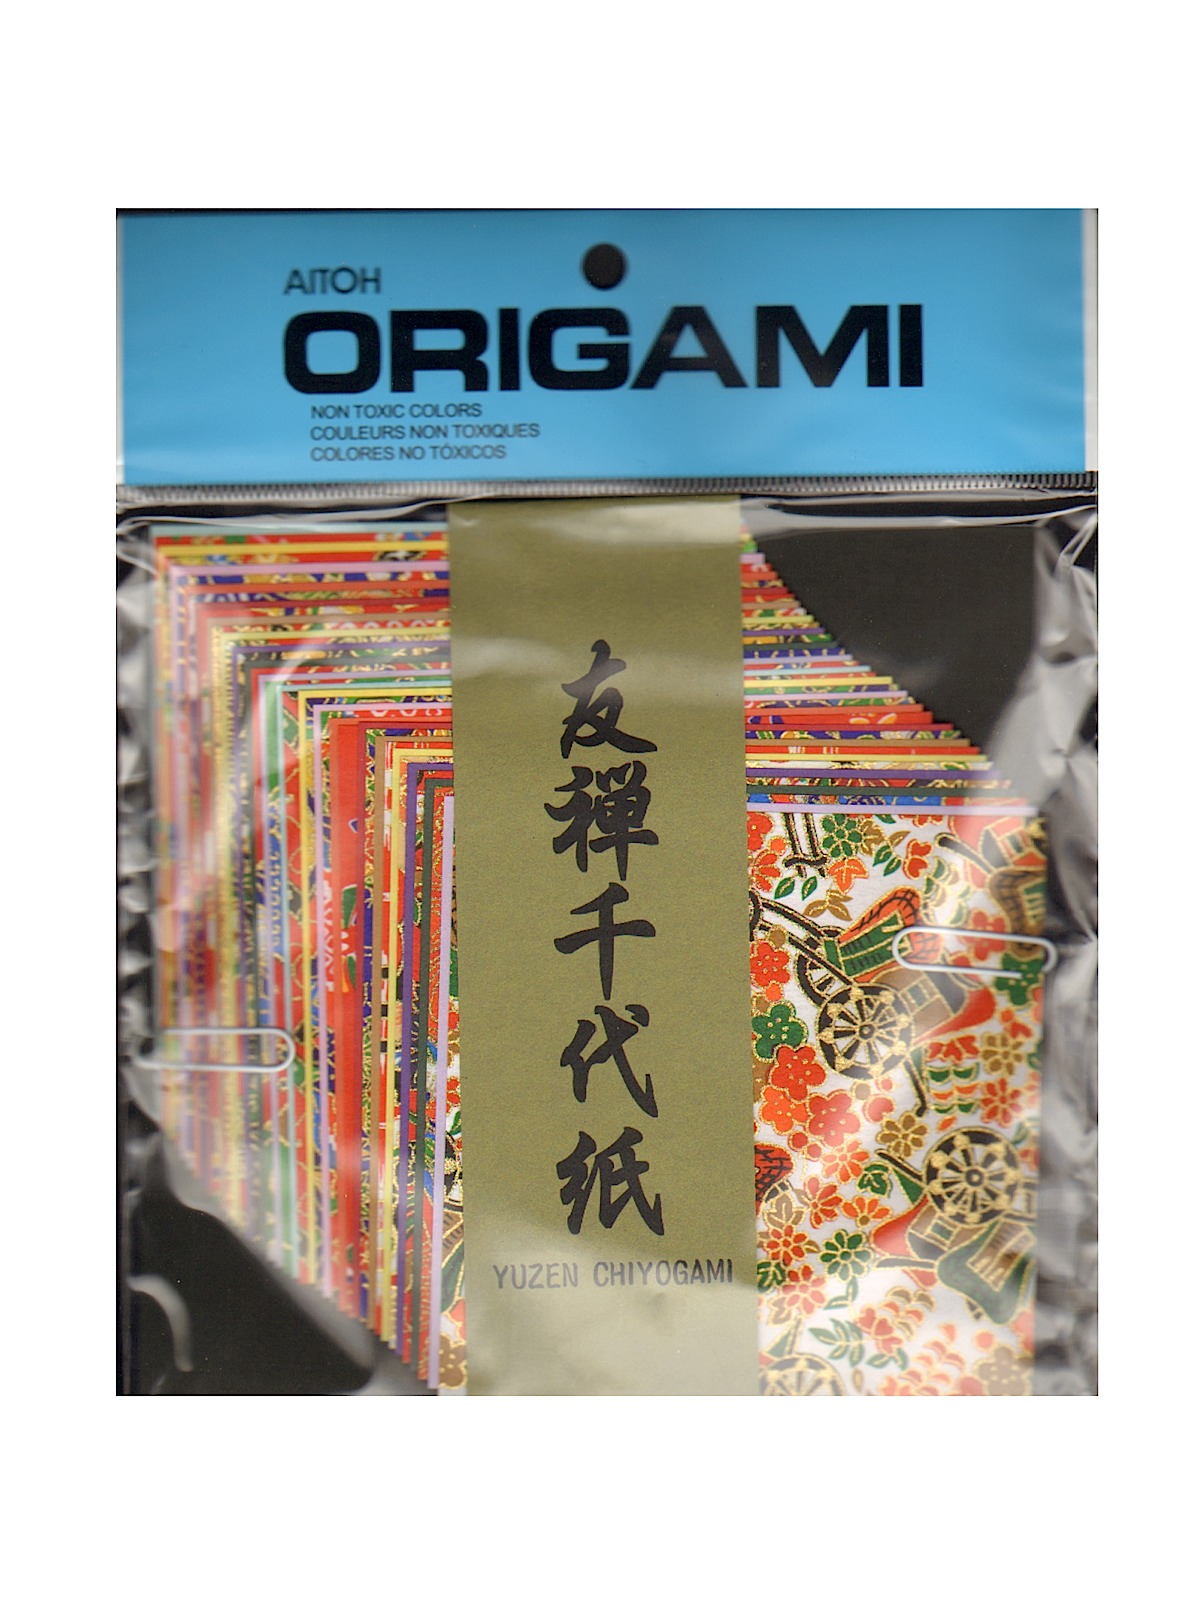 Origami Paper 4 1 2 In. X 4 1 2 In. Yusen Chiyogami Washi 40 Sheets